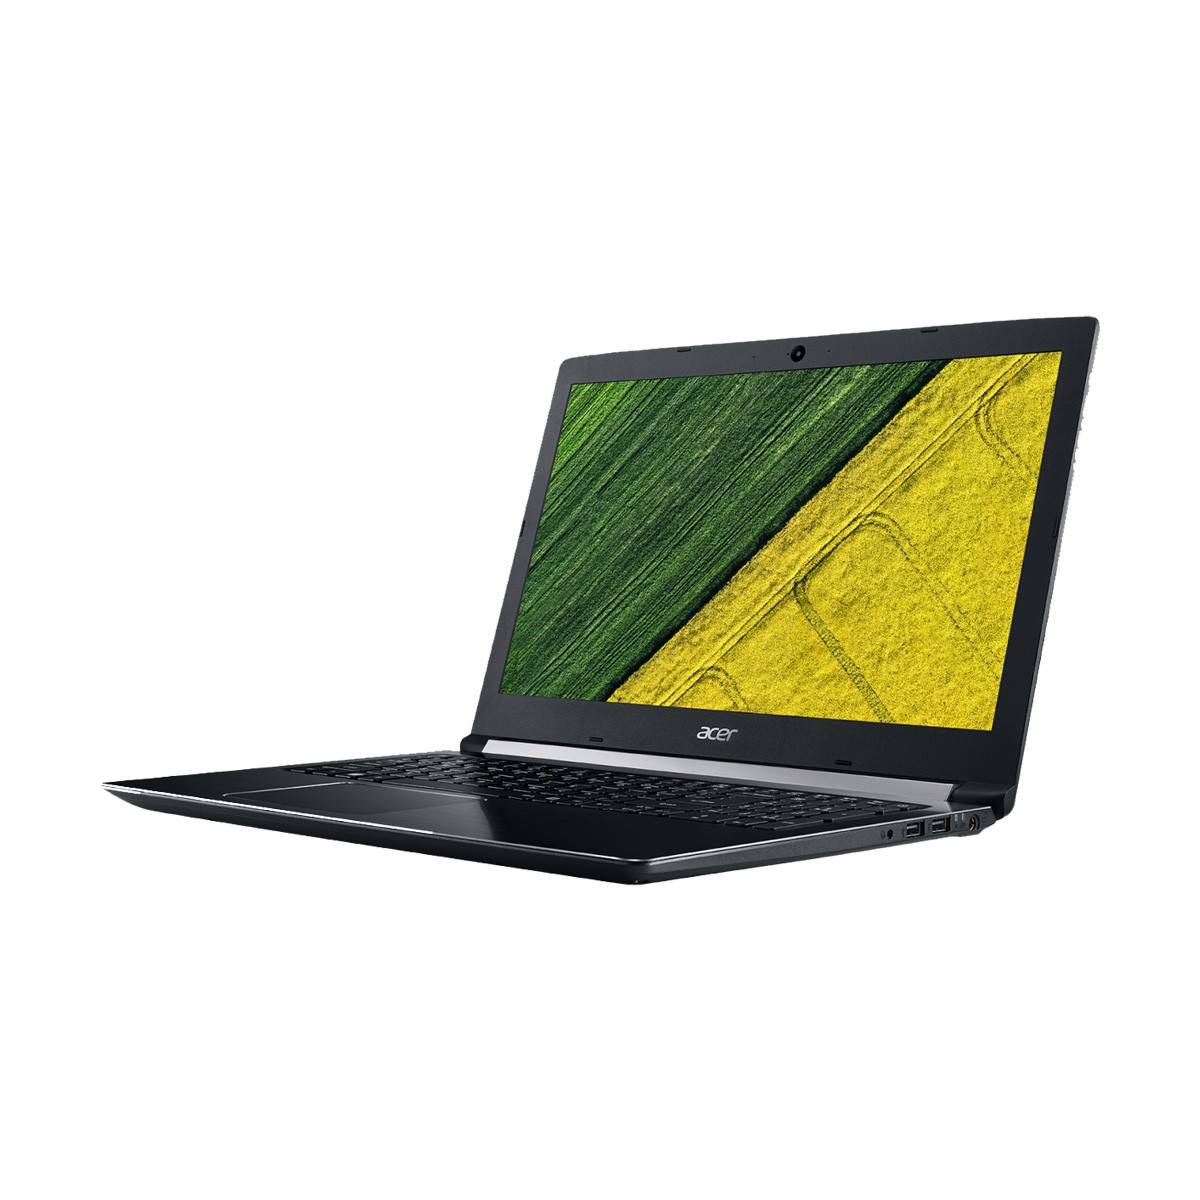 Buy Acer Notebook And Win A Gift